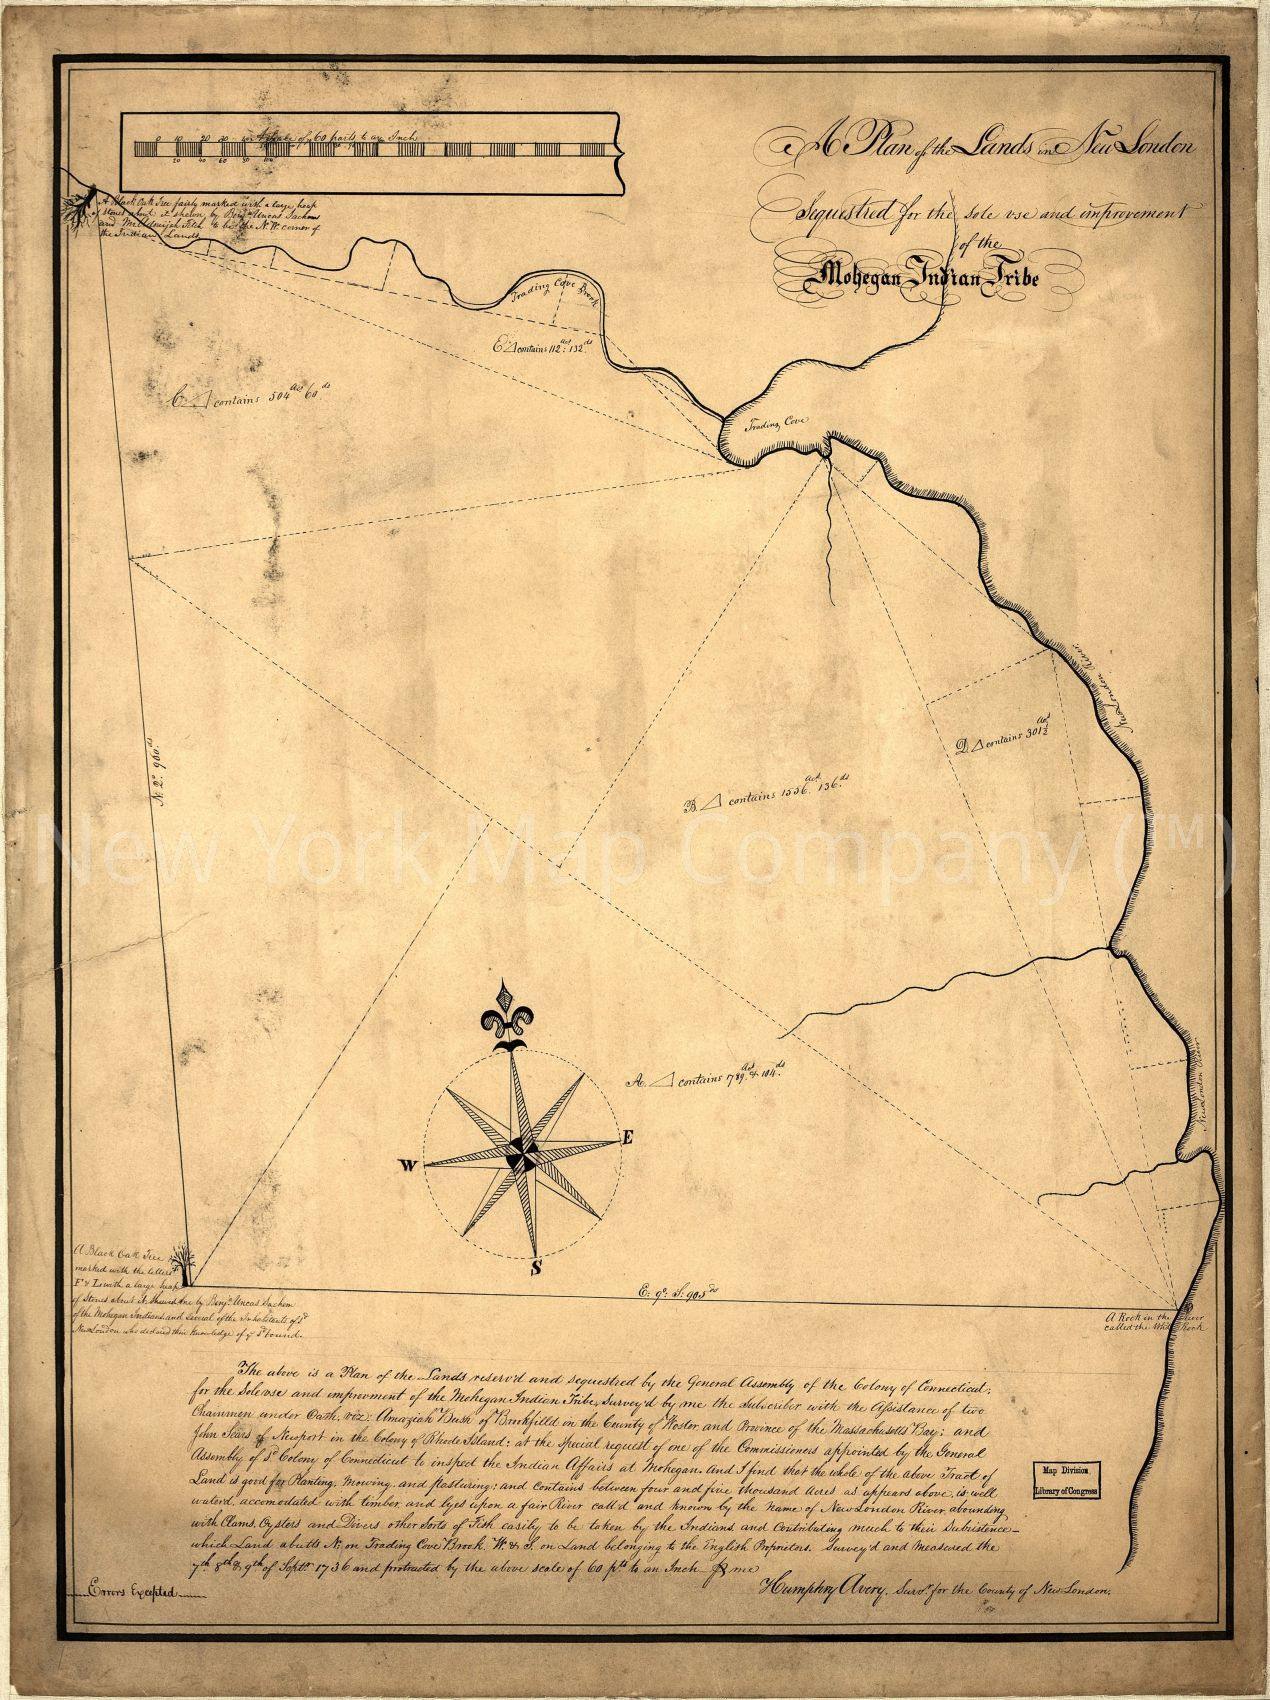 1736 map A plan of the lands in New London sequestred for the sole use and improvement of the Mohegan Indian tribe. Map Subjects: Connecticut | Mohegan Indians | Montville Conn: Town | Montville Town | Real Property | - New York Map Company